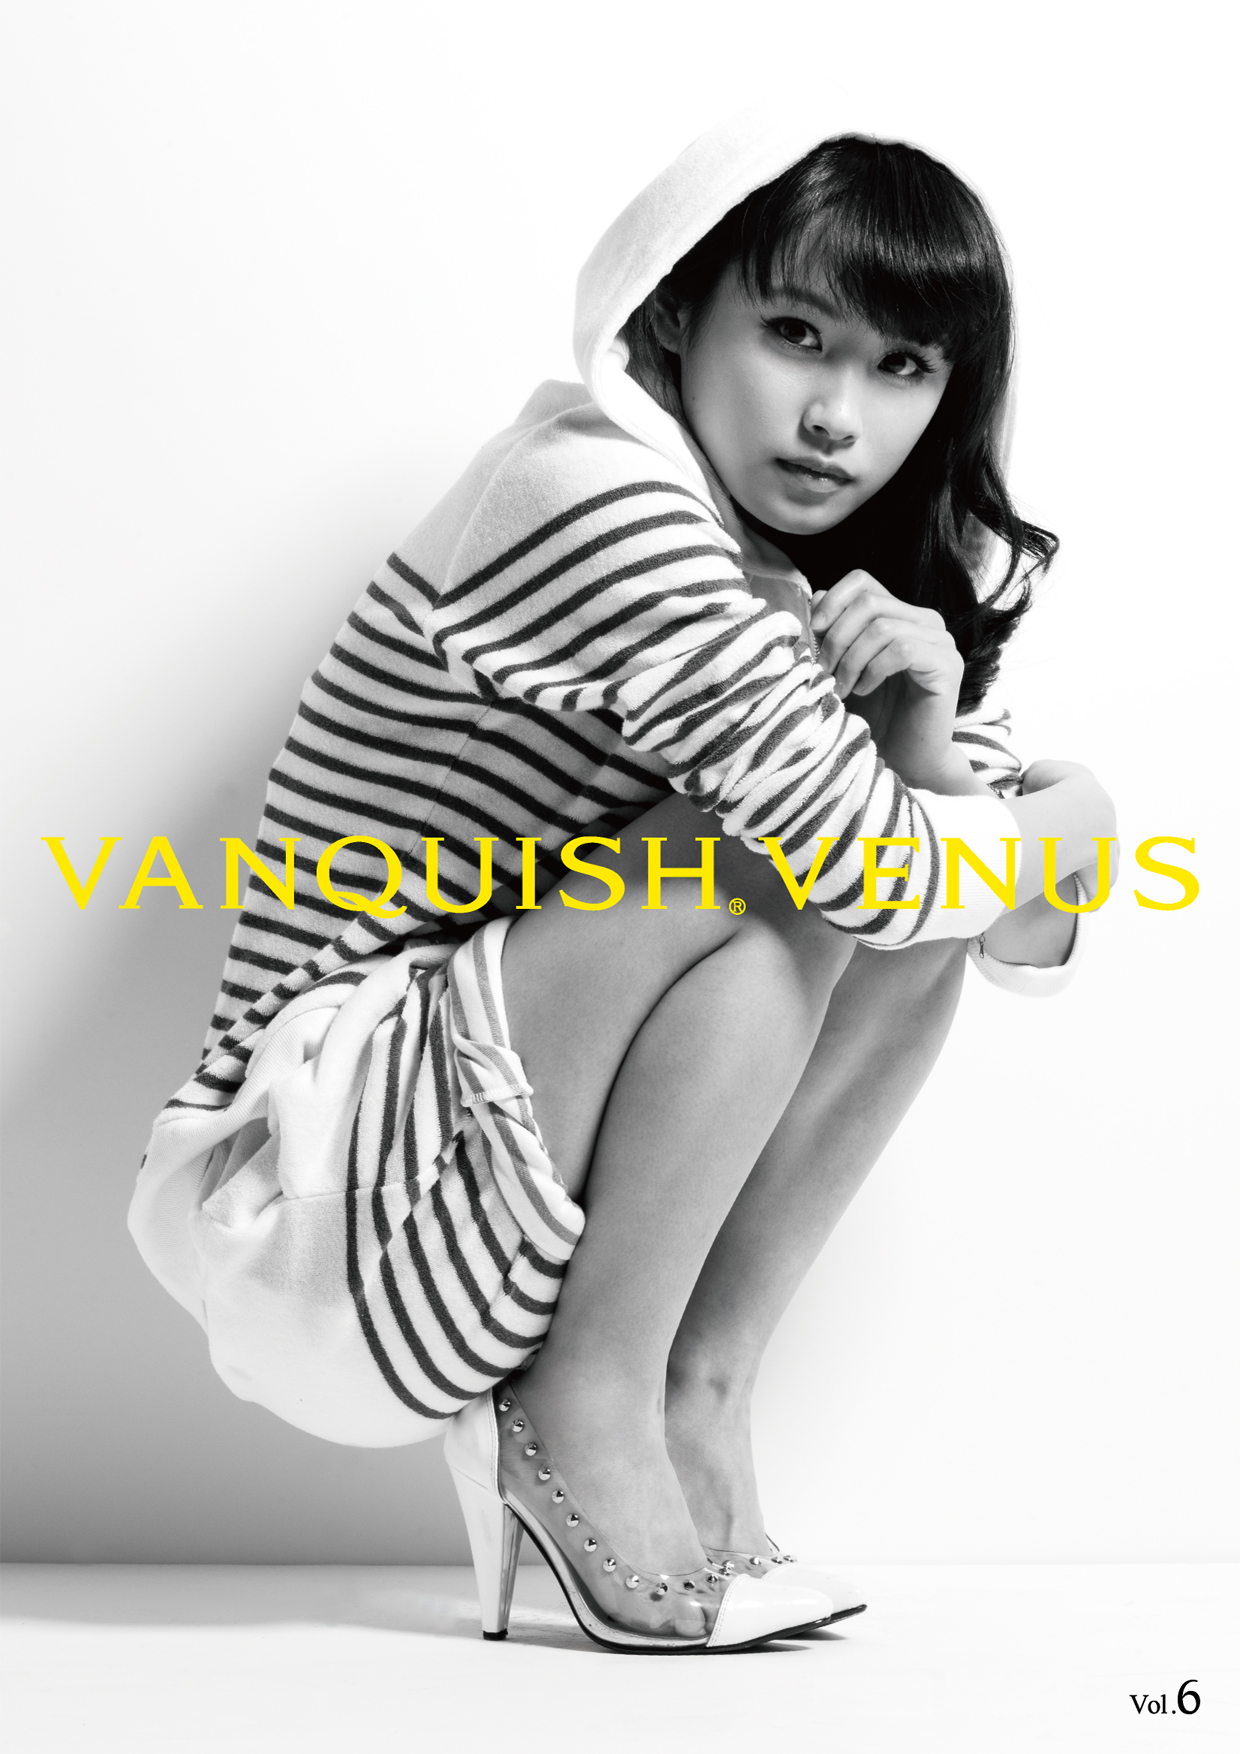 Takahashi Ai appeared on the cover of VANQUISH VENUS!